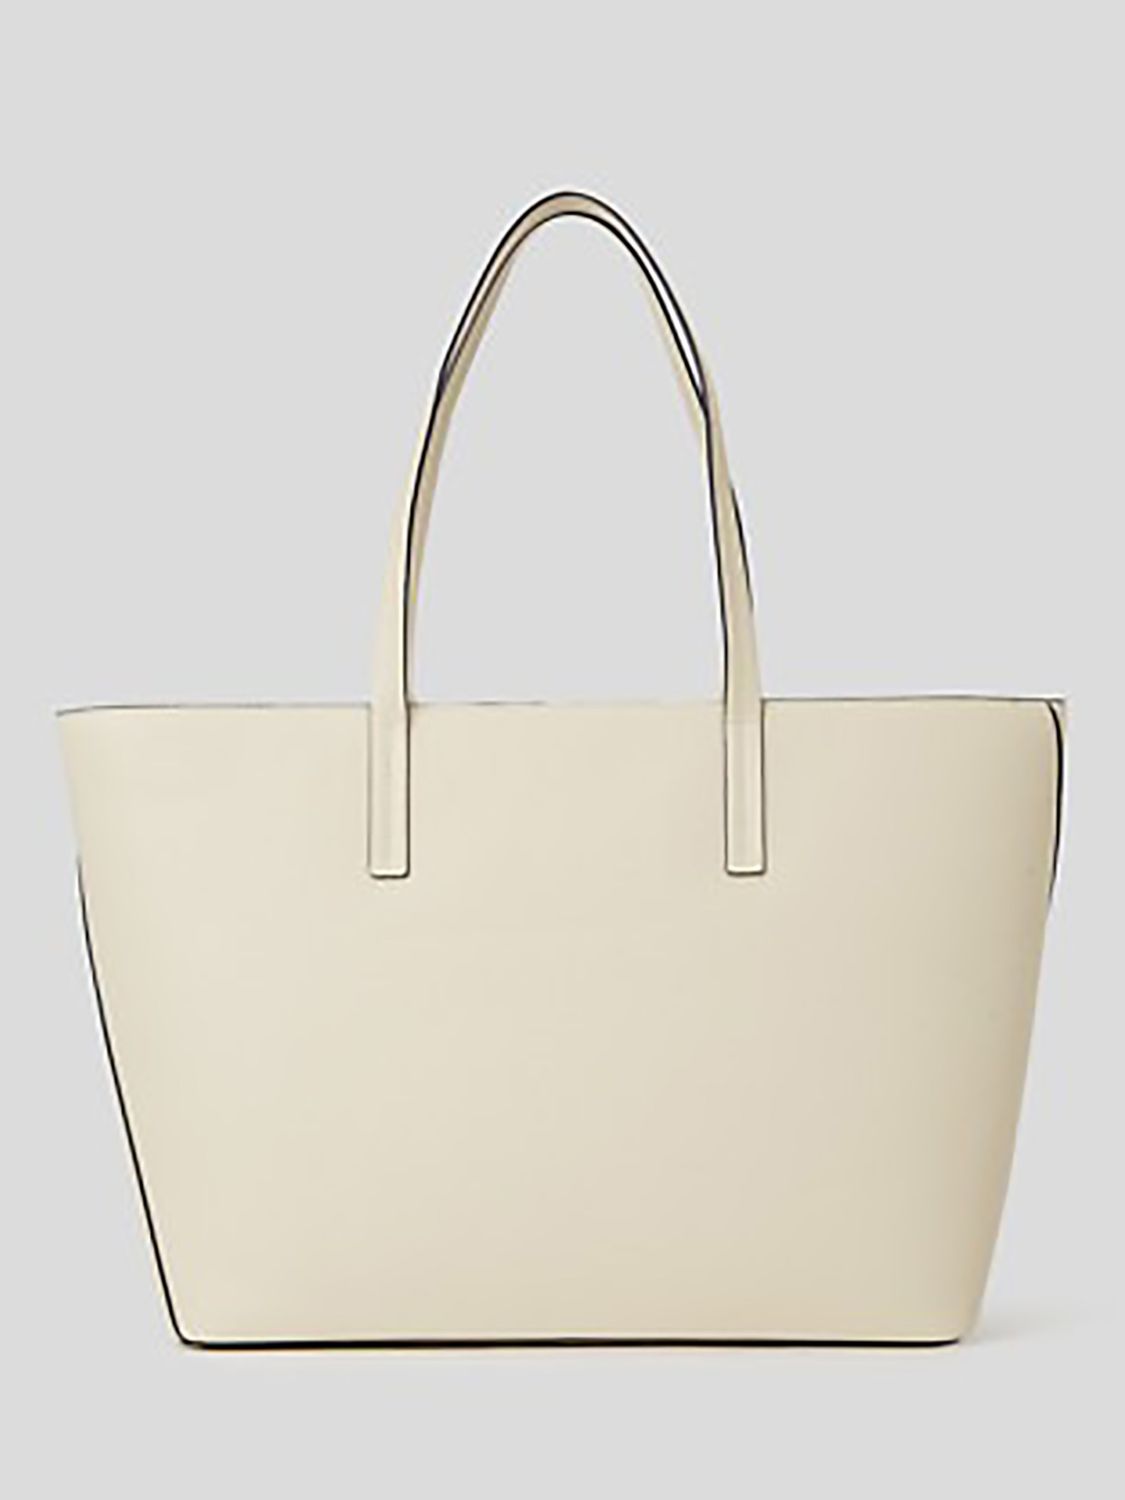 KARL LAGERFELD Rue St-Guillaume Large Tote Bag, Off White, One Size